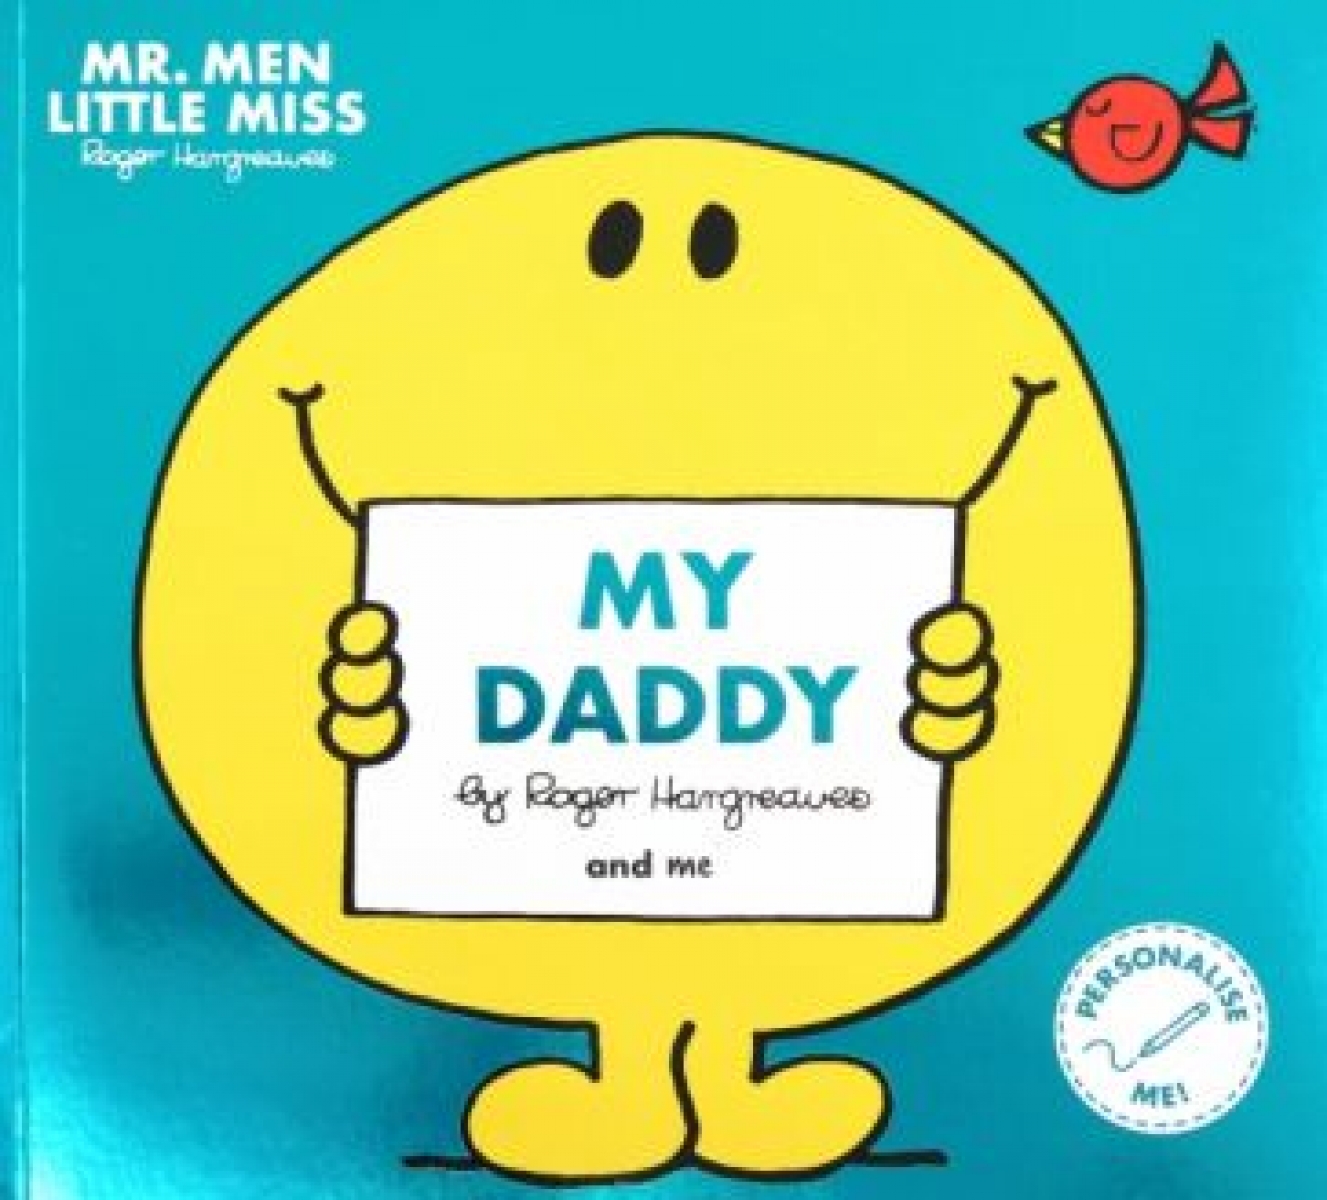 Hargreaves Roger Mr Men Little Miss. My Daddy 